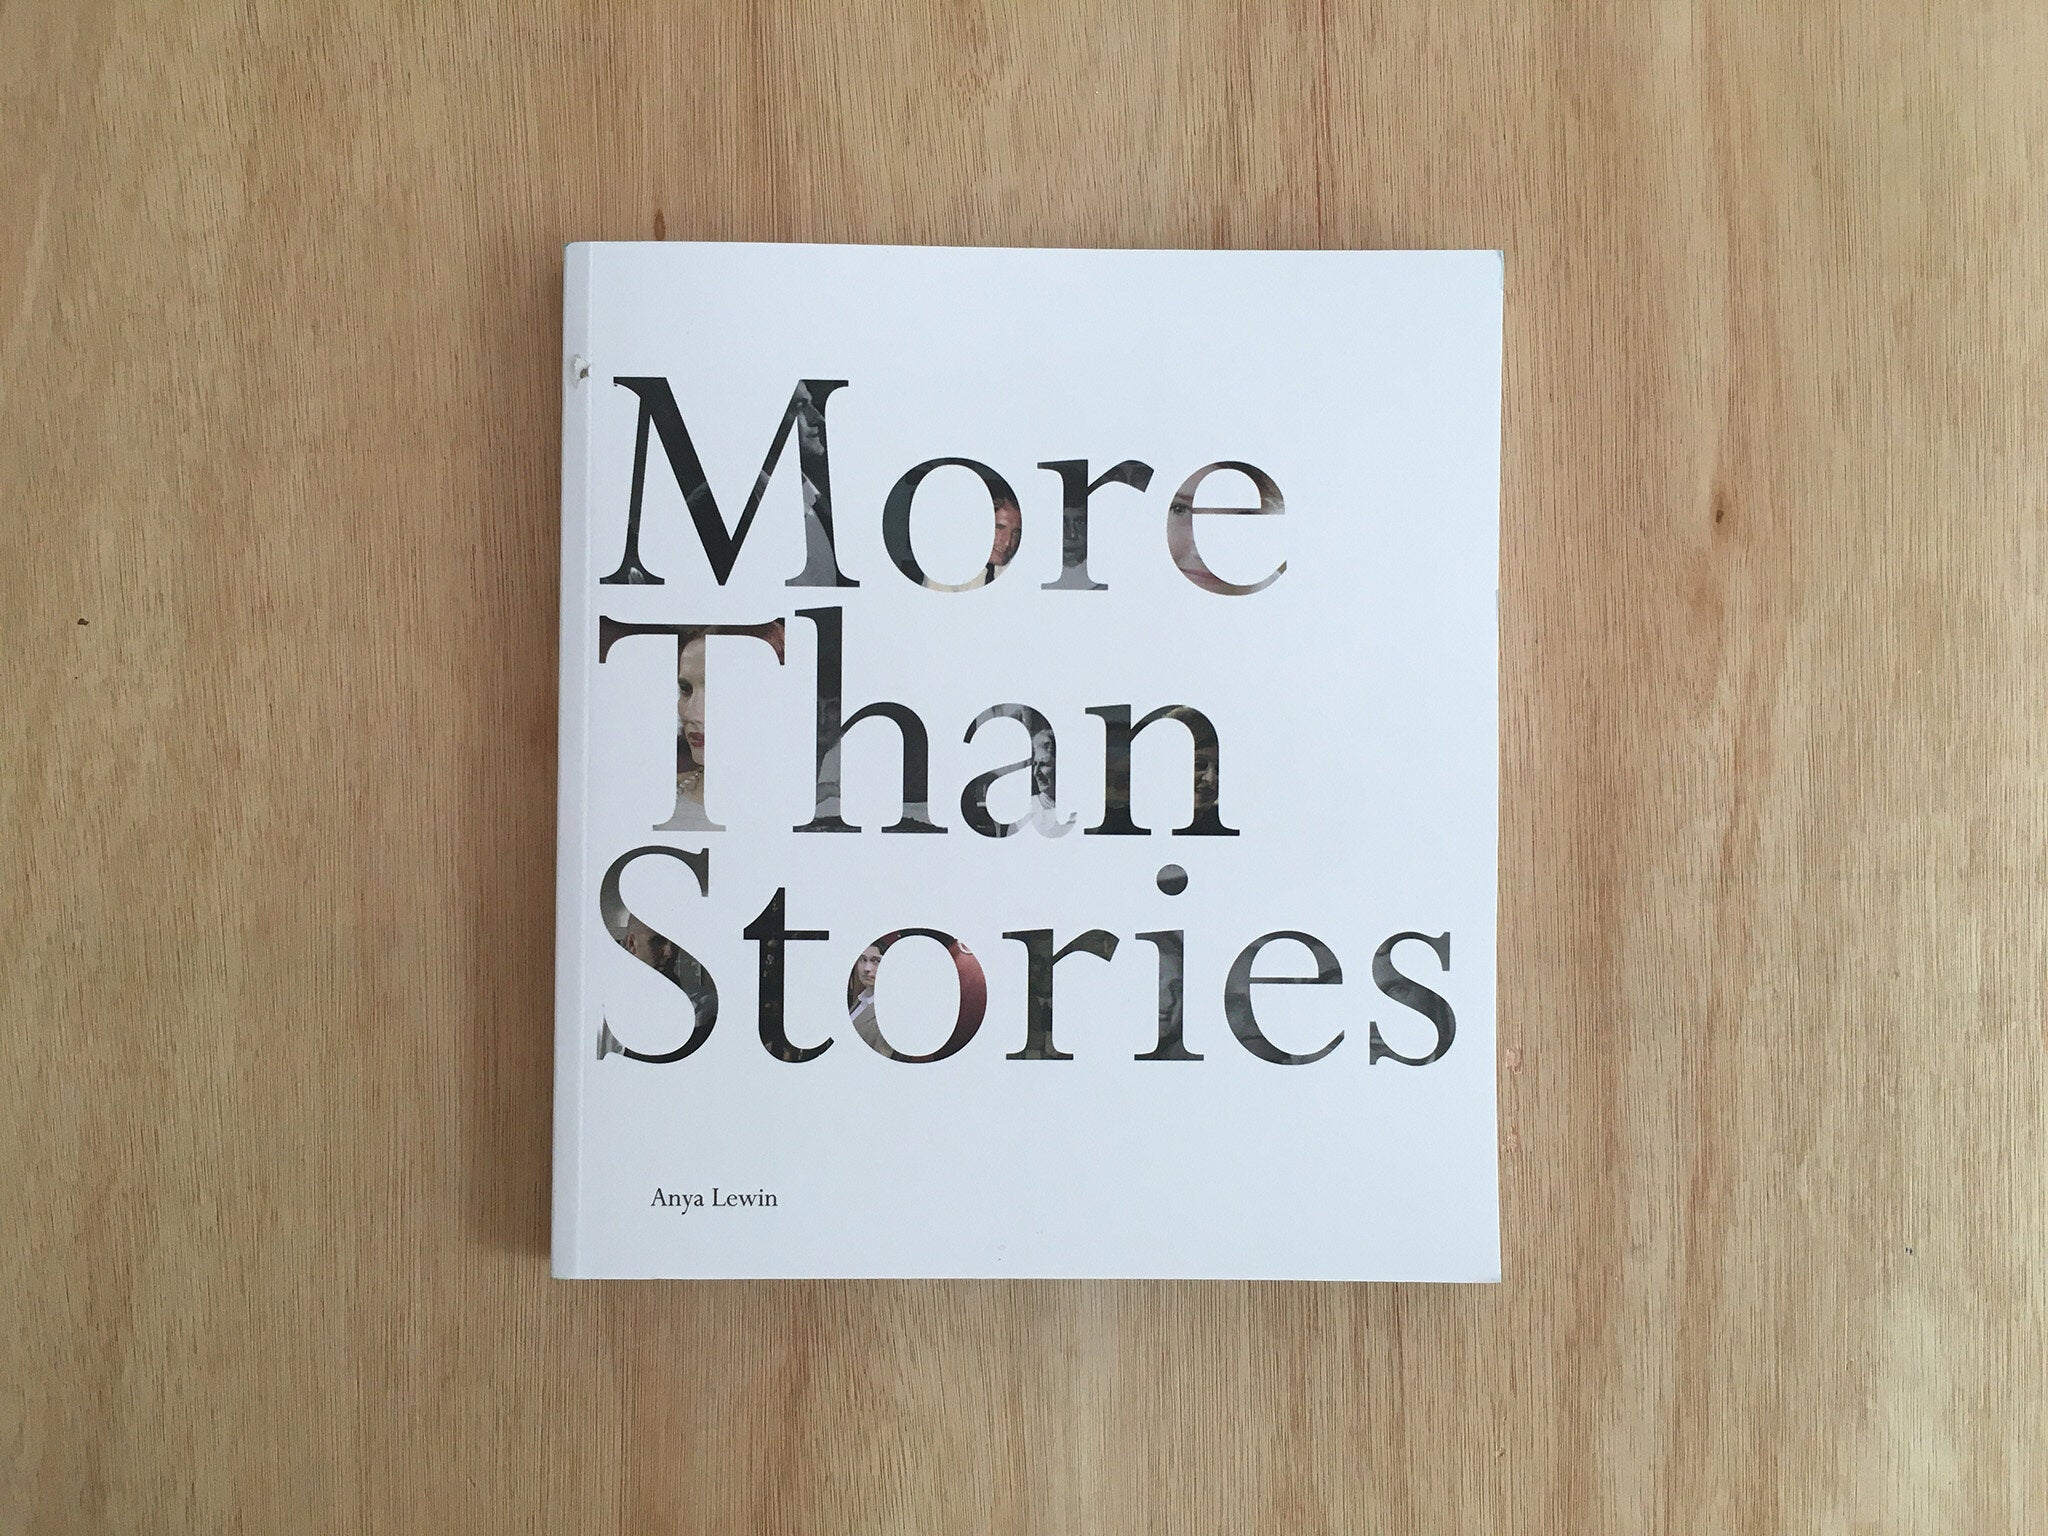 MORE THAN STORIES by Anya Lewin